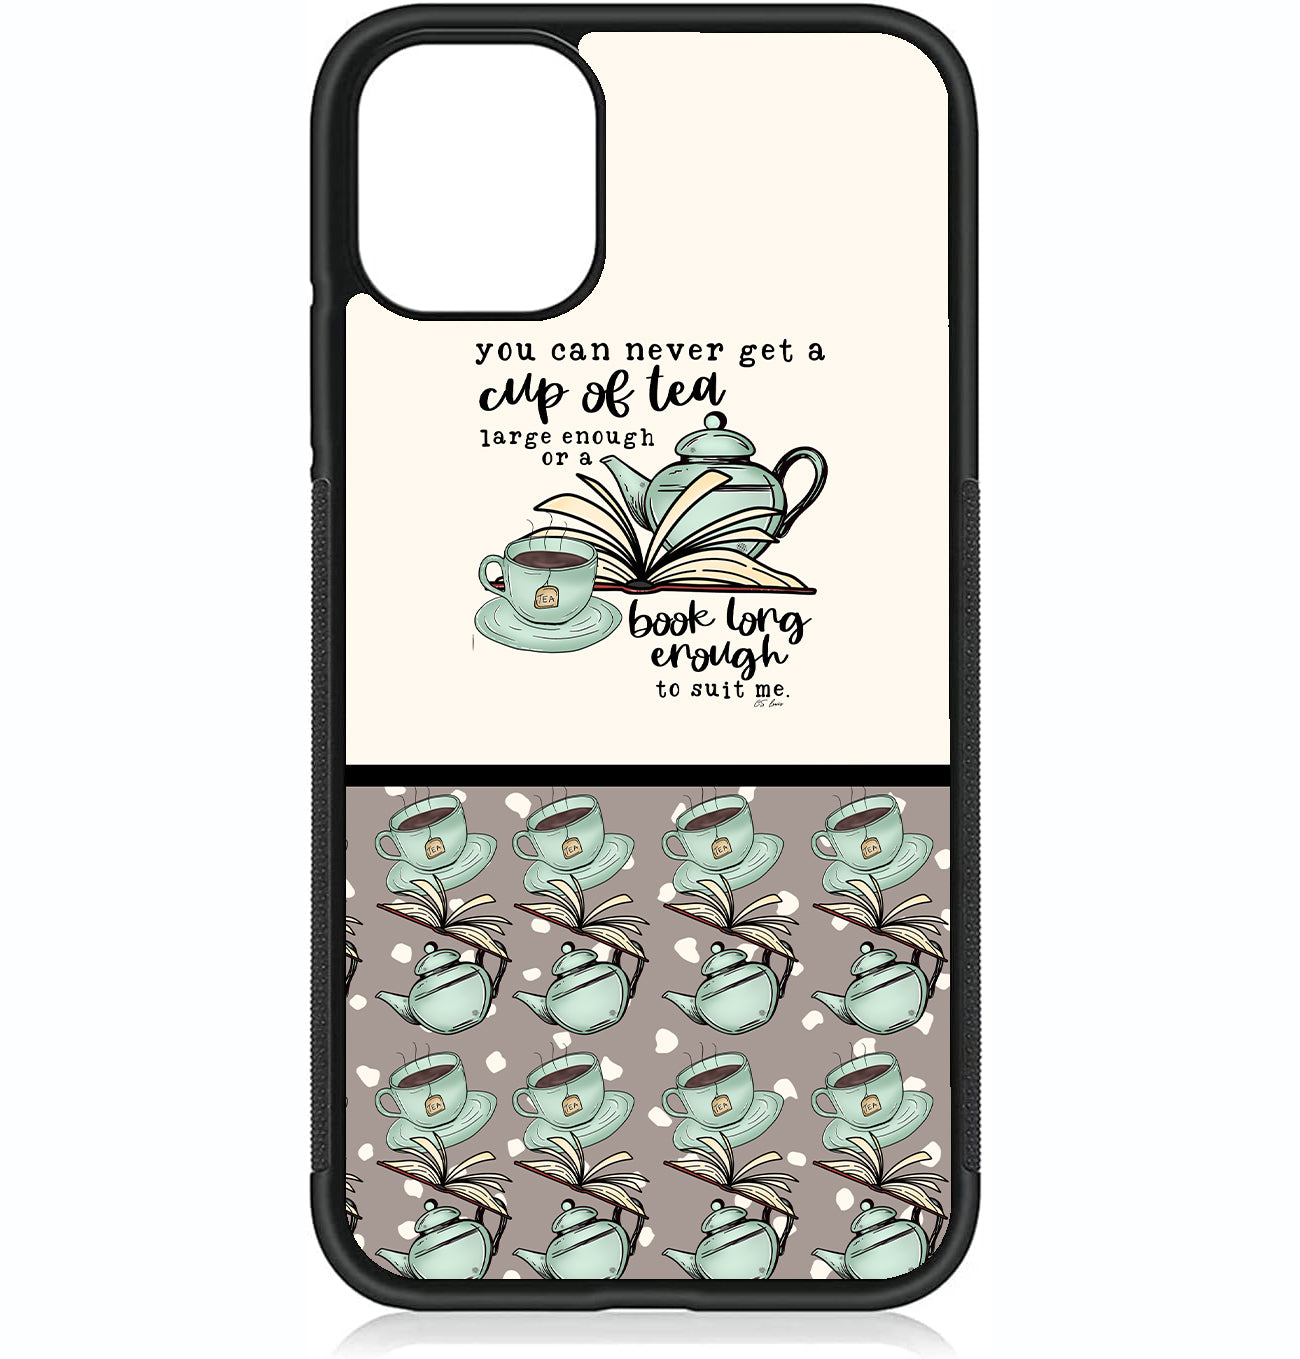 You Can Never Get a Cup of Tea Large Enough Phone Case